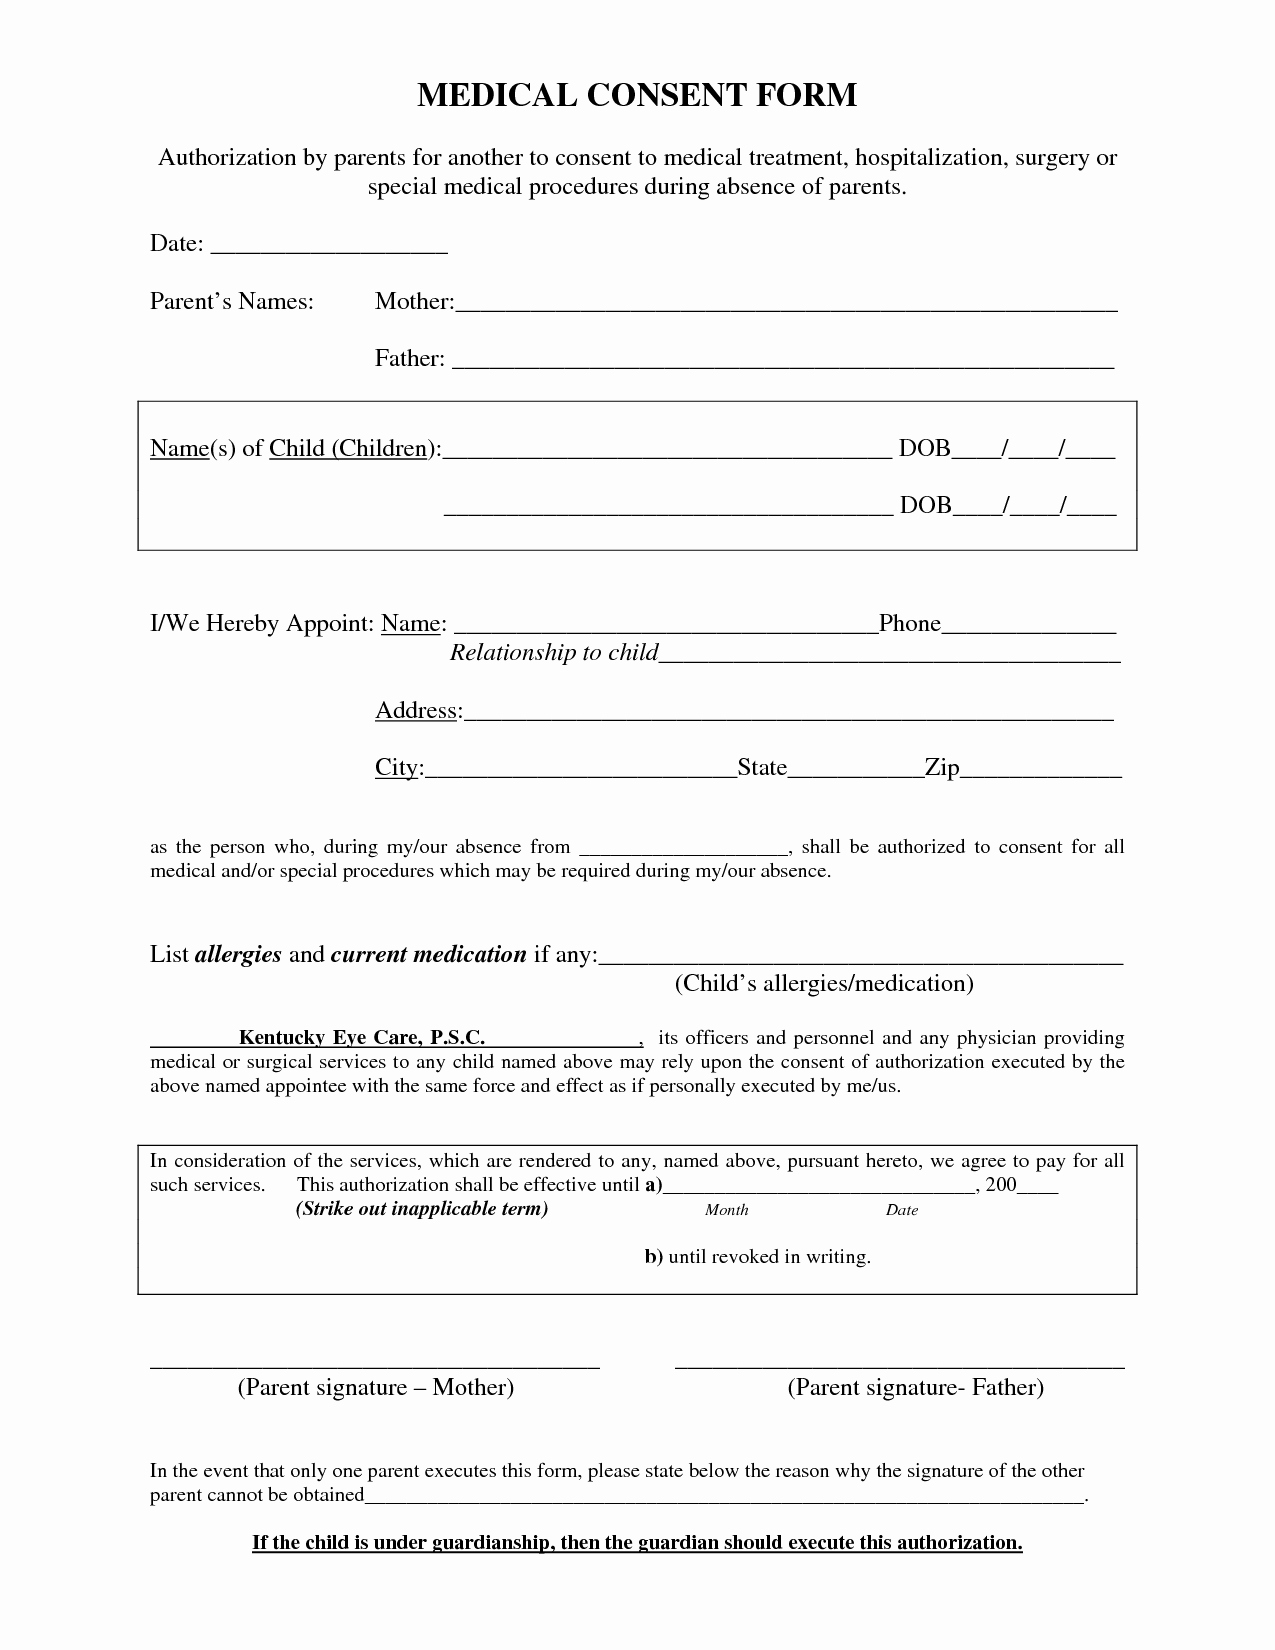 Medical Consent form Templates Luxury Medical Procedure Consent form Template